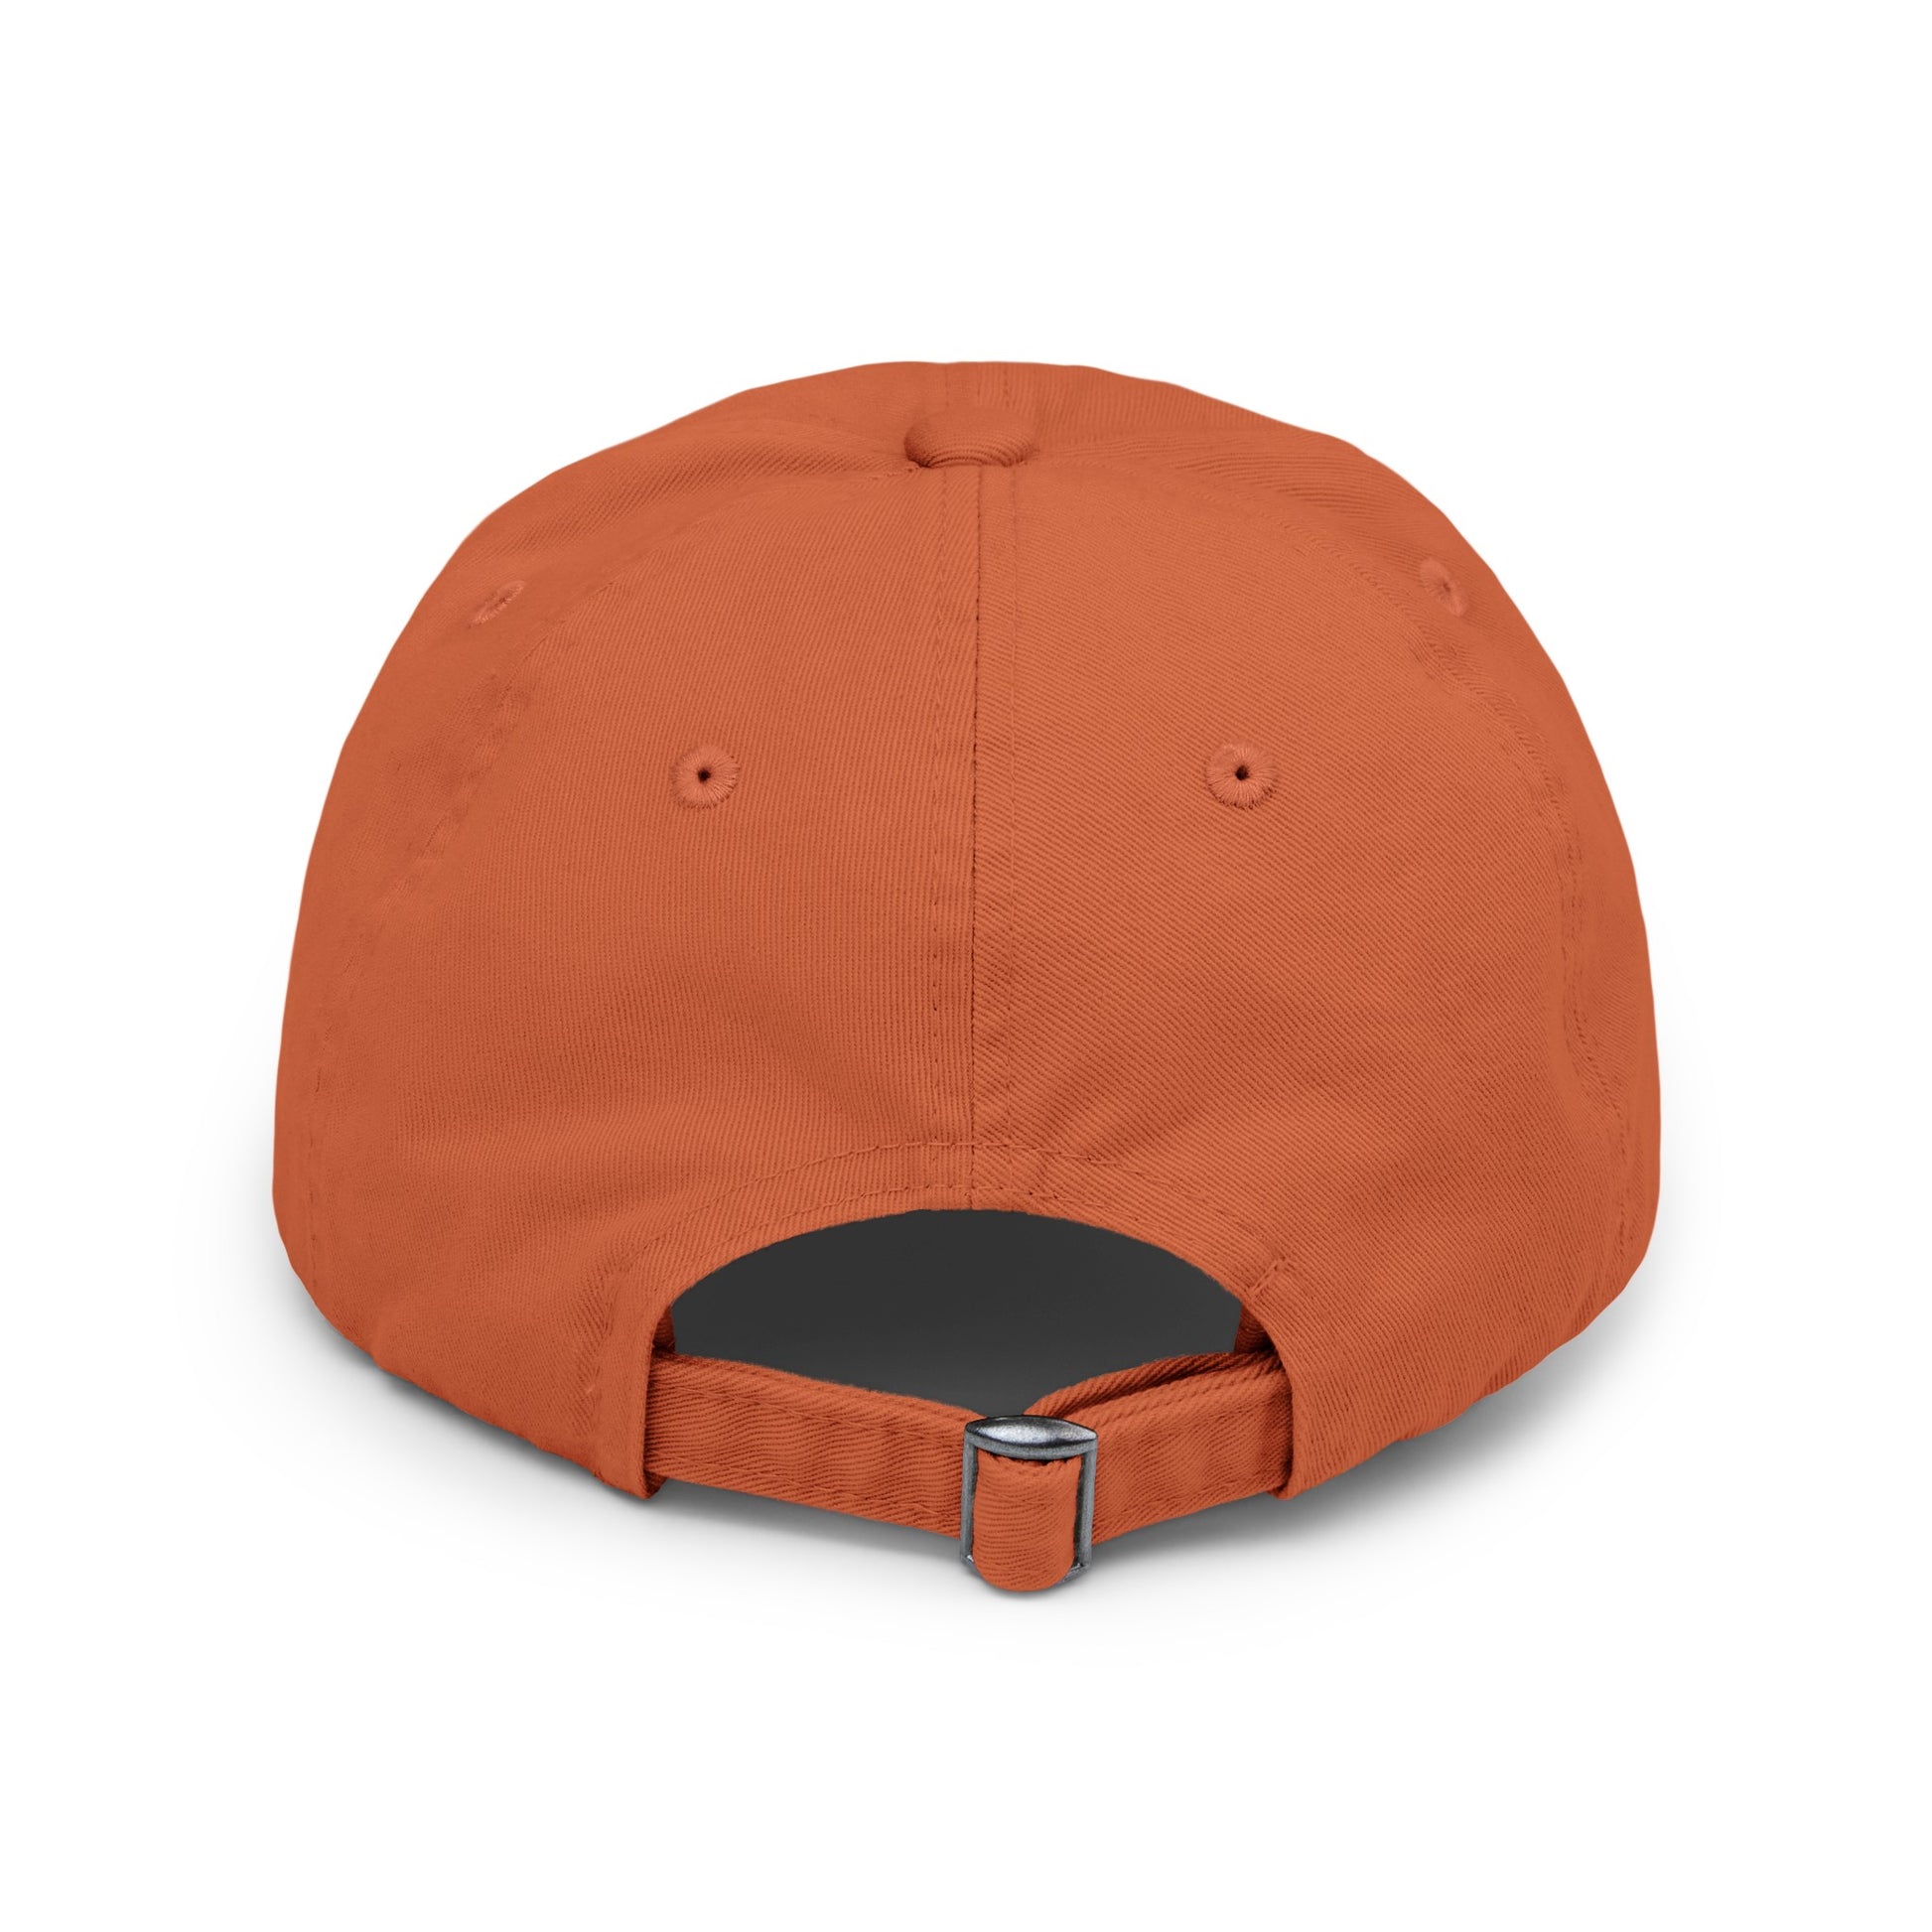 an orange hat with a metal buckle on it